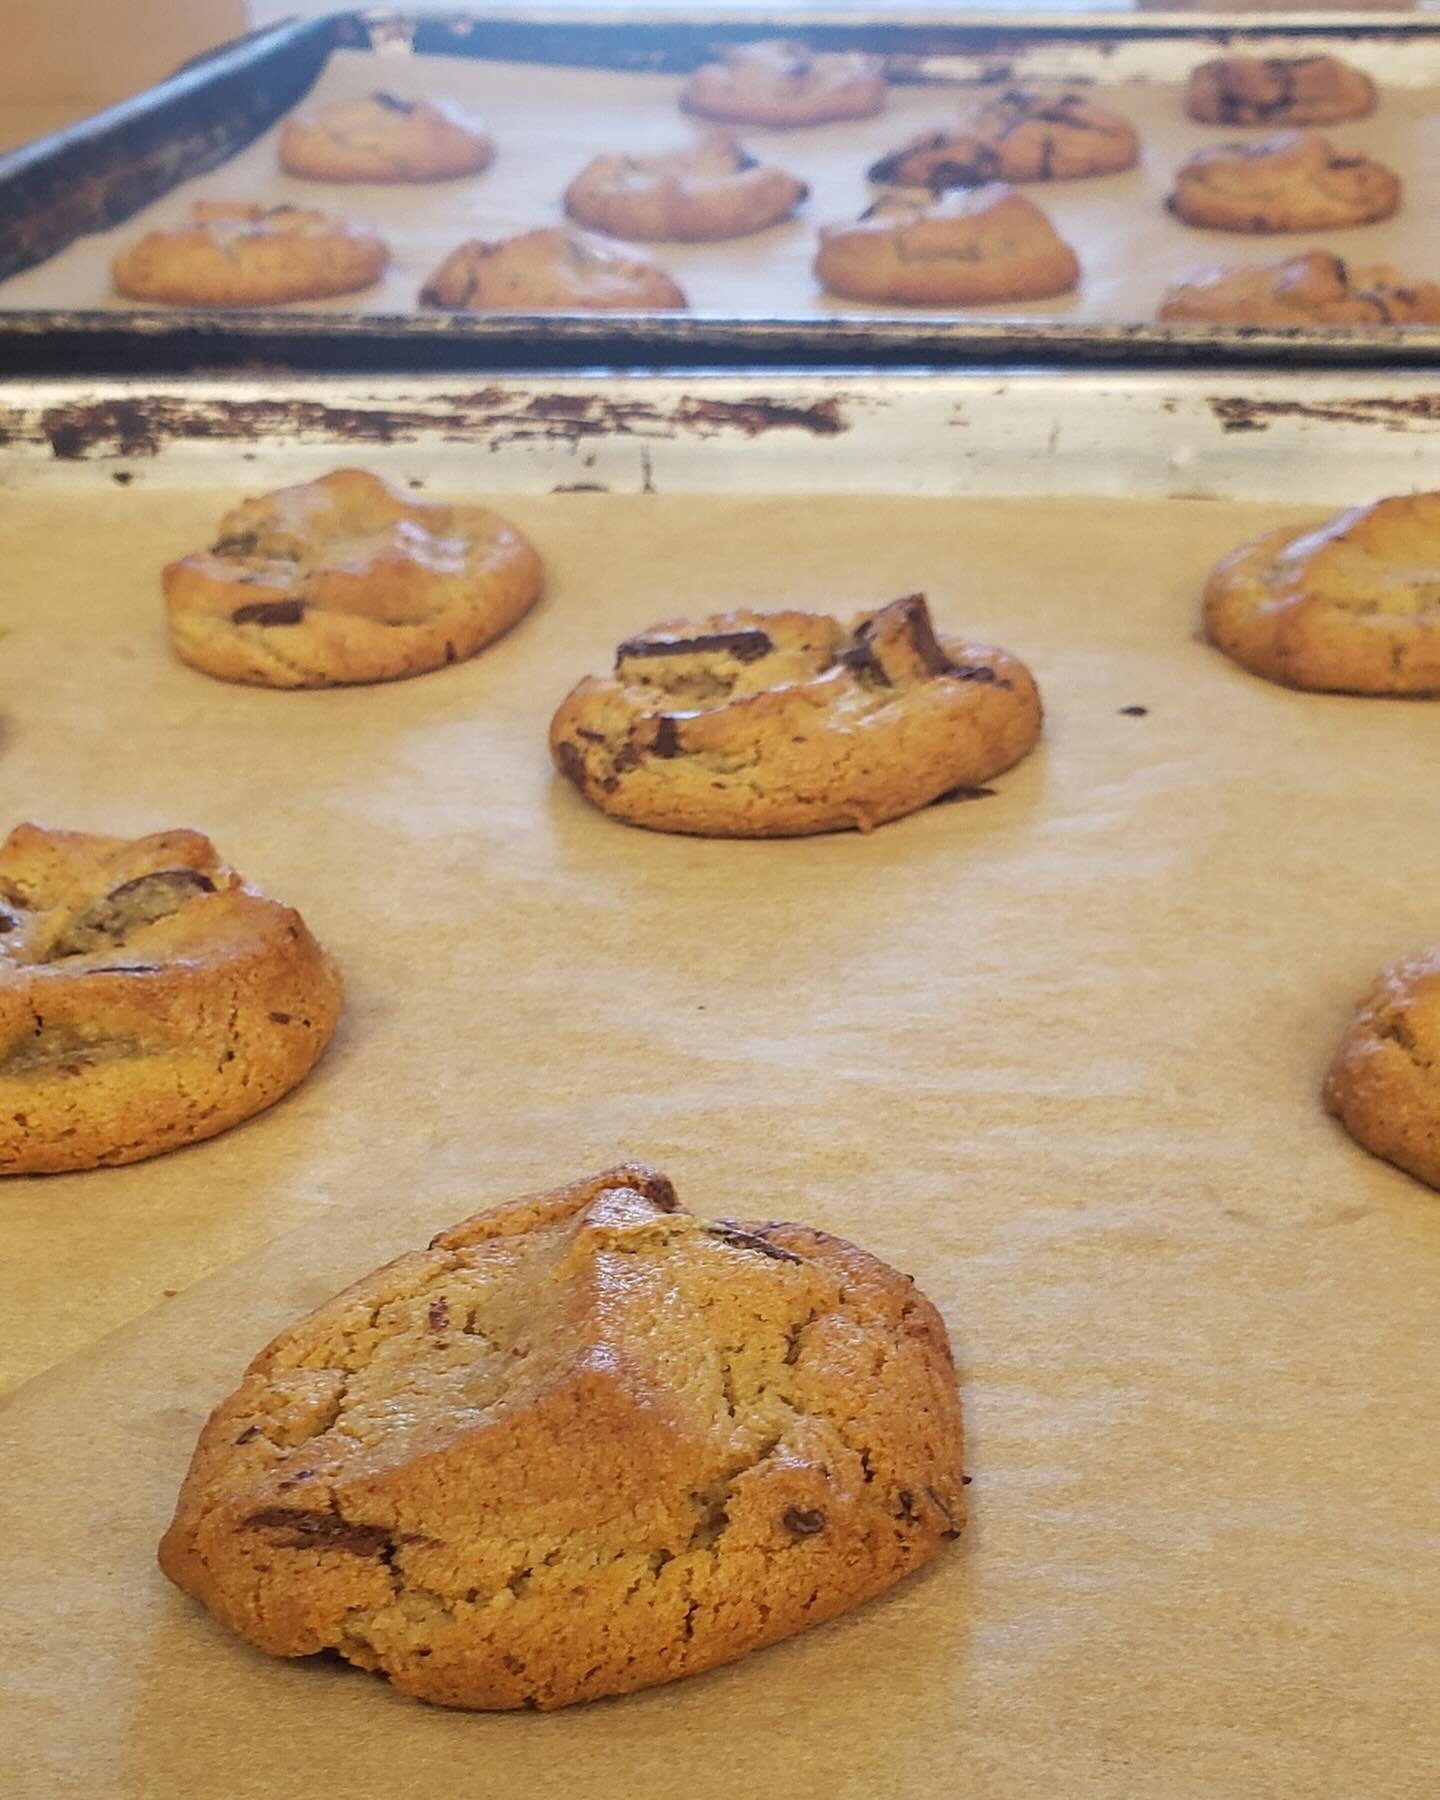 Catch us at the @bikeeastbay 40th &amp; San Pablo energizer station serving mini chocolate chip cookies for Bike to Wherever Day. Or swing by the bakery for a full-sized chocolate chip cookie with your bike helmet in hand and get 10% off your order. 